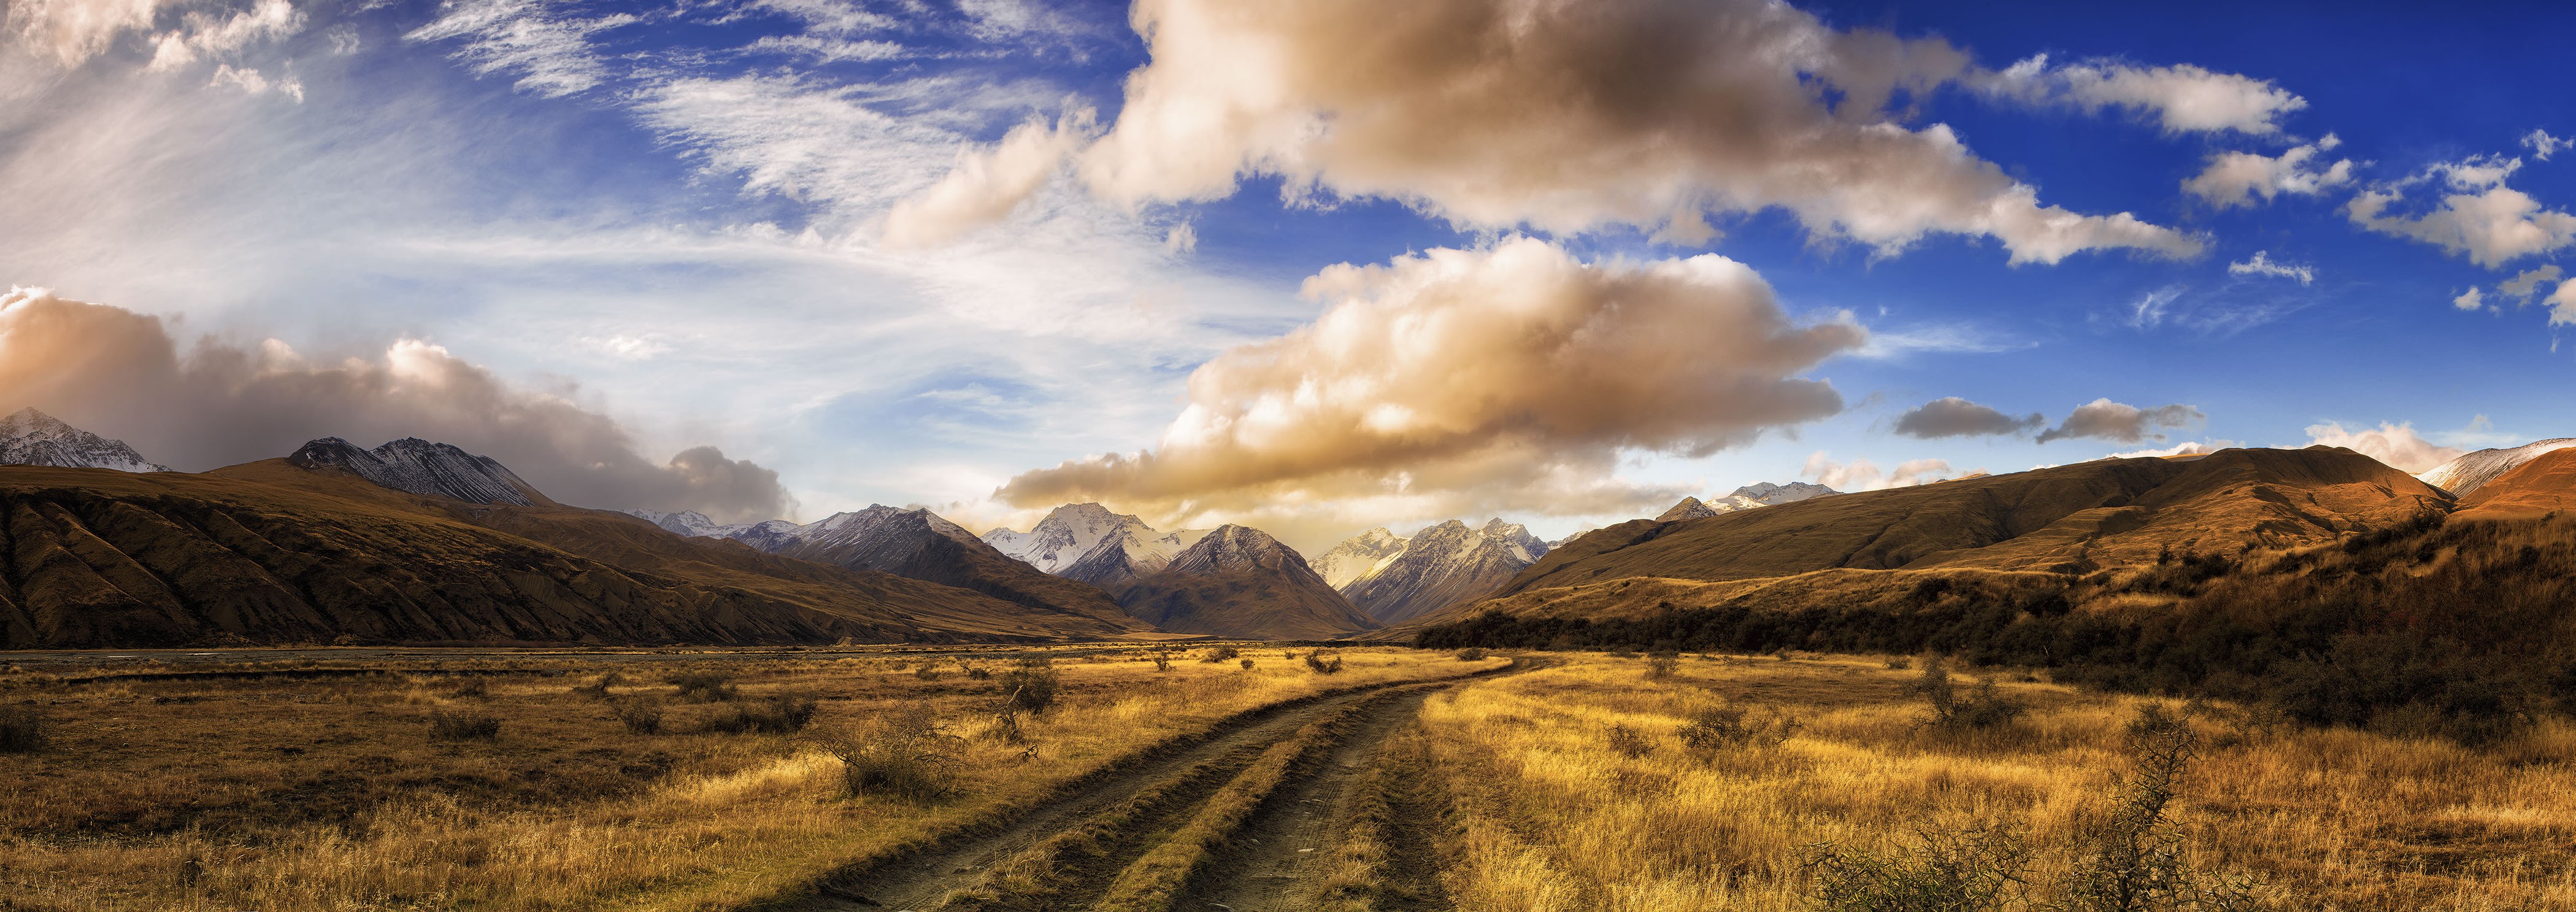 General 4199x1486 nature landscape panorama dirt road dry grass mountains clouds shrubs sunset snowy peak New Zealand